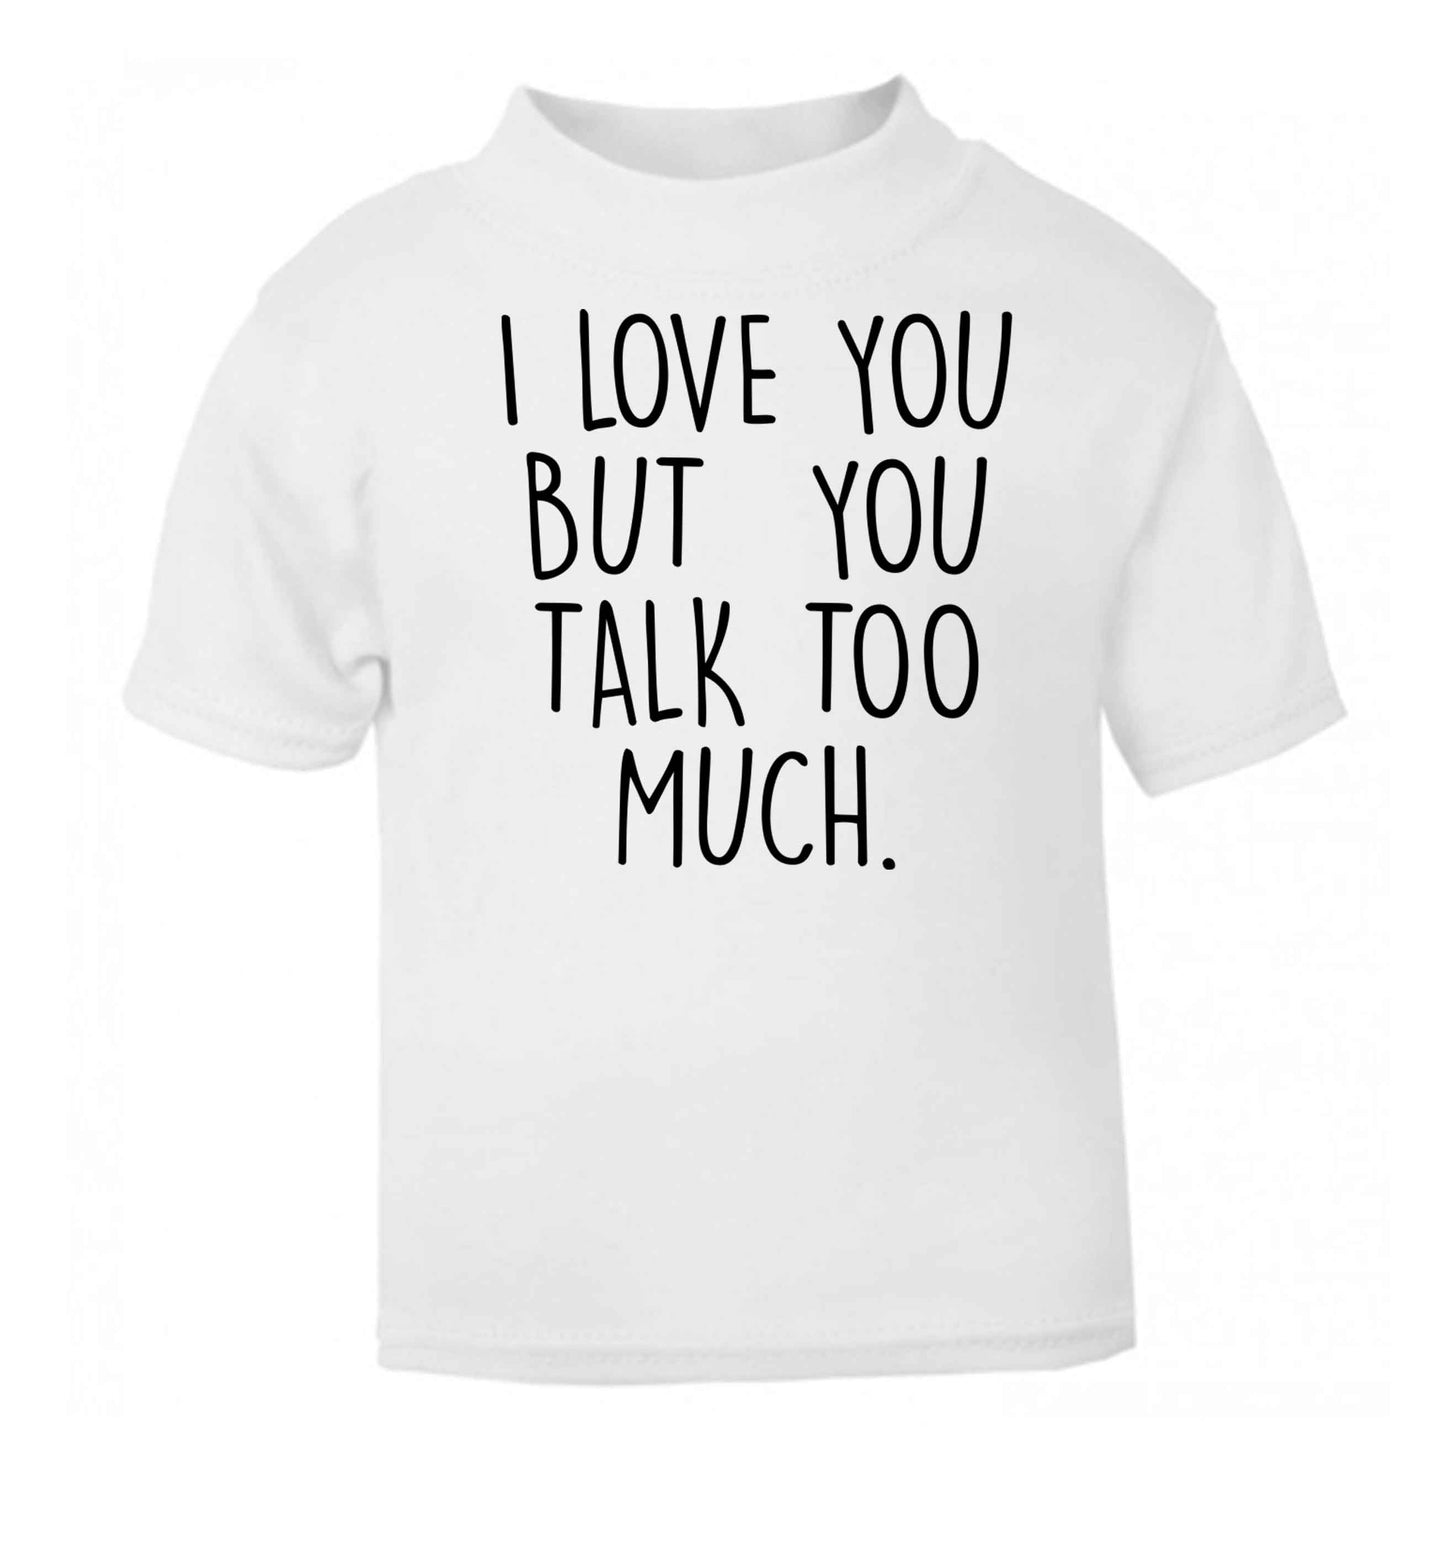 I love you but you talk too much white baby toddler Tshirt 2 Years